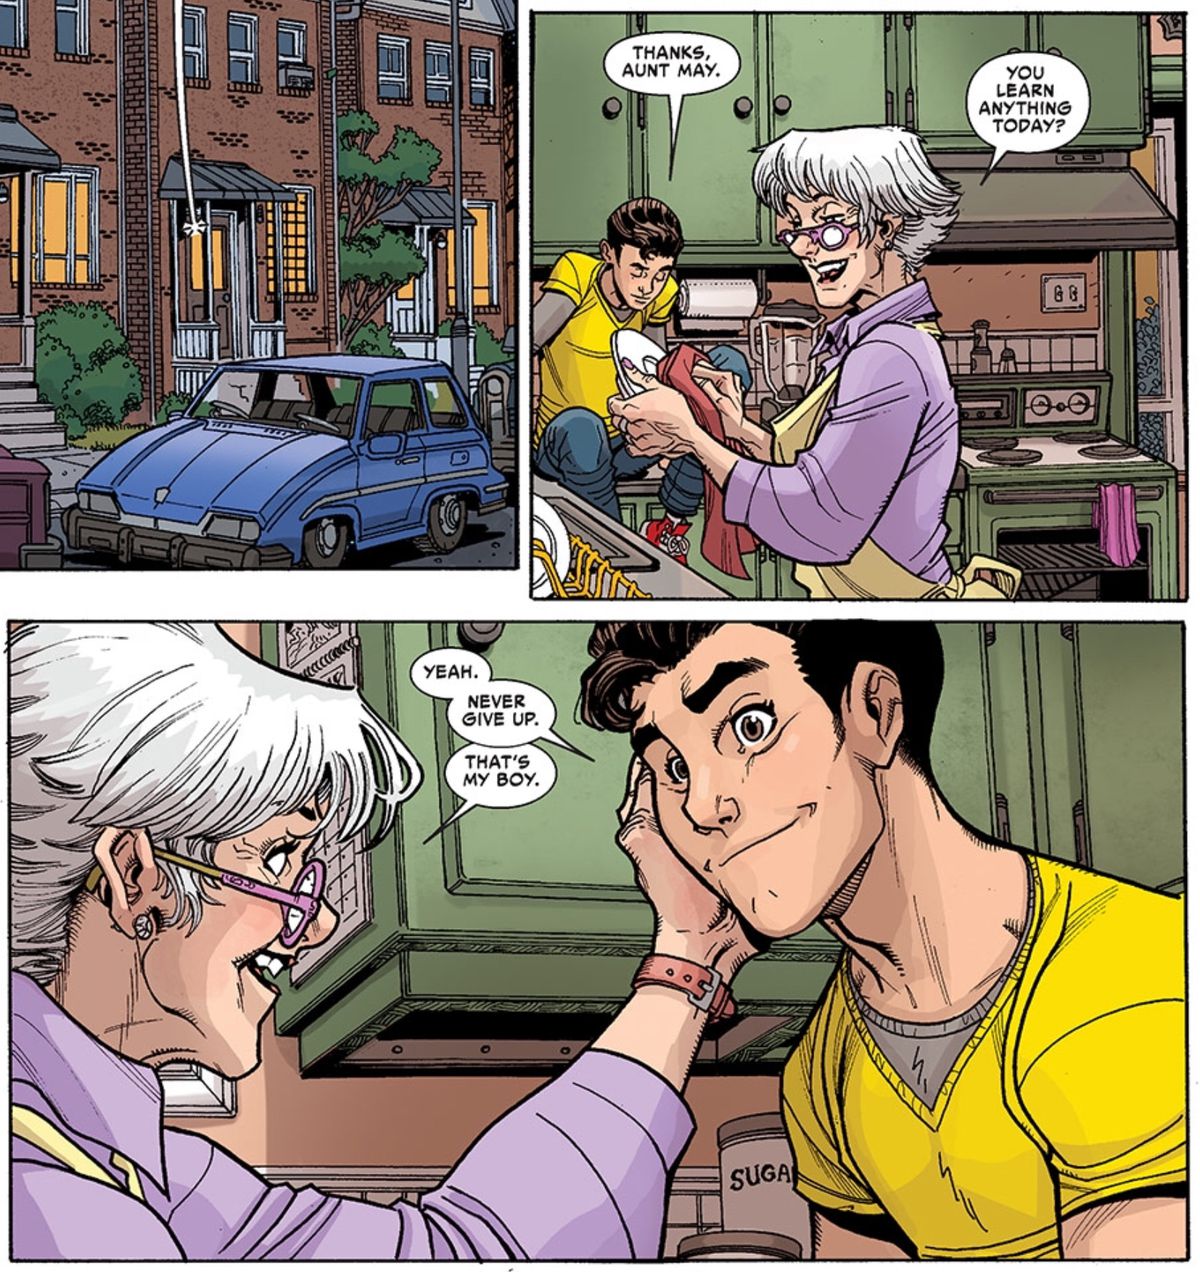 Aunt May and Peter Parker in Spidey #1, Marvel Comics (2015). 